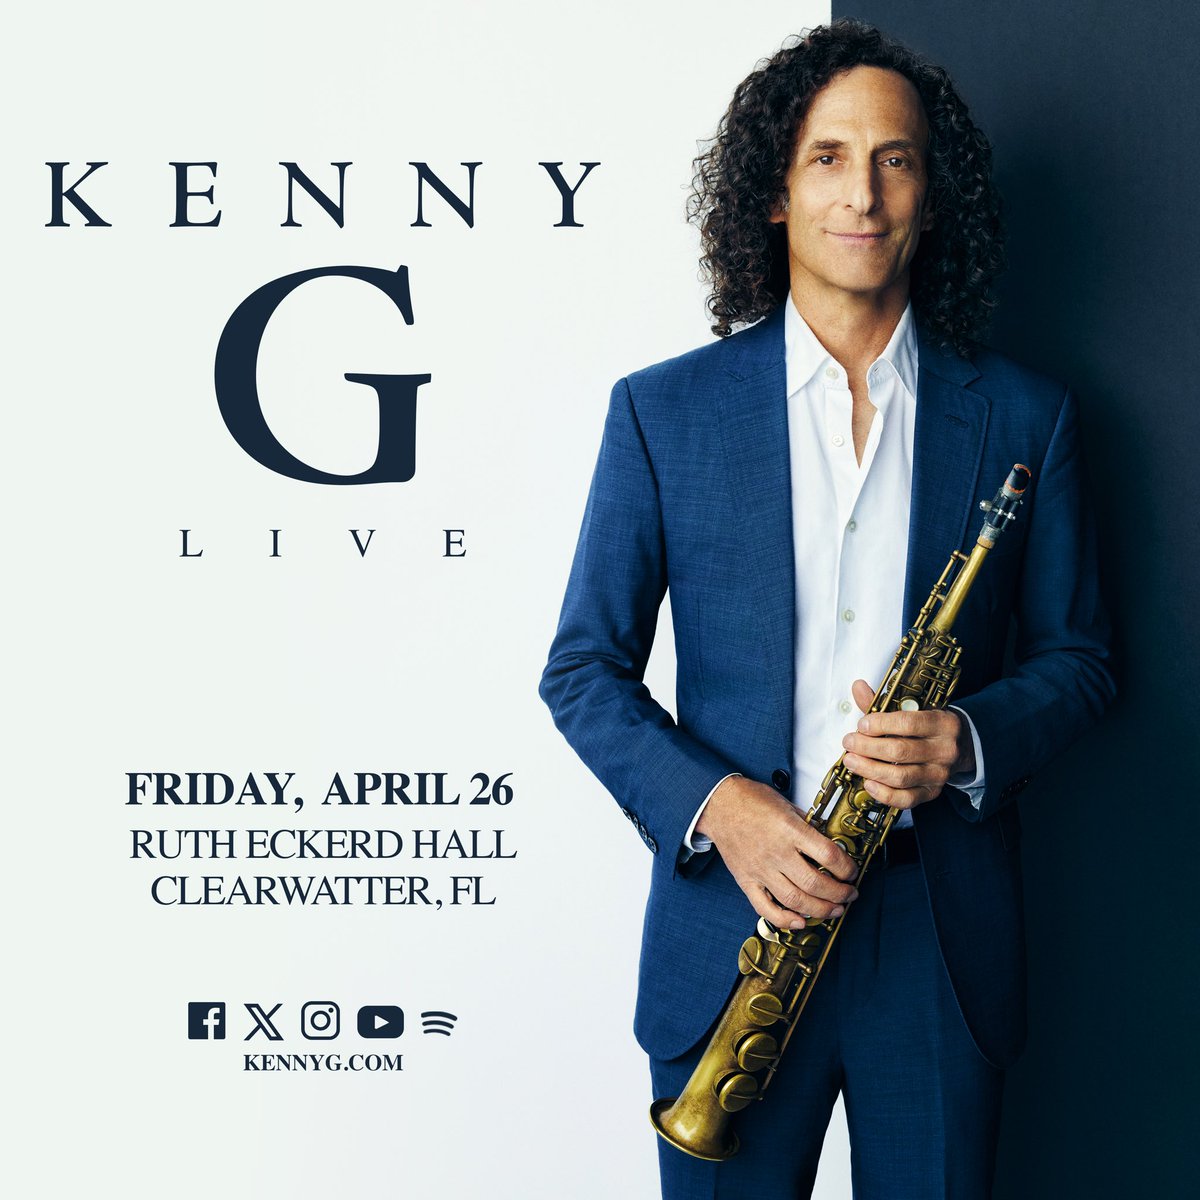 Come spend an evening with me at @RuthEckerdHall in Clearwater, FL on April 26th! We’ve got a great show planned. Get tickets: kennyg.com/events